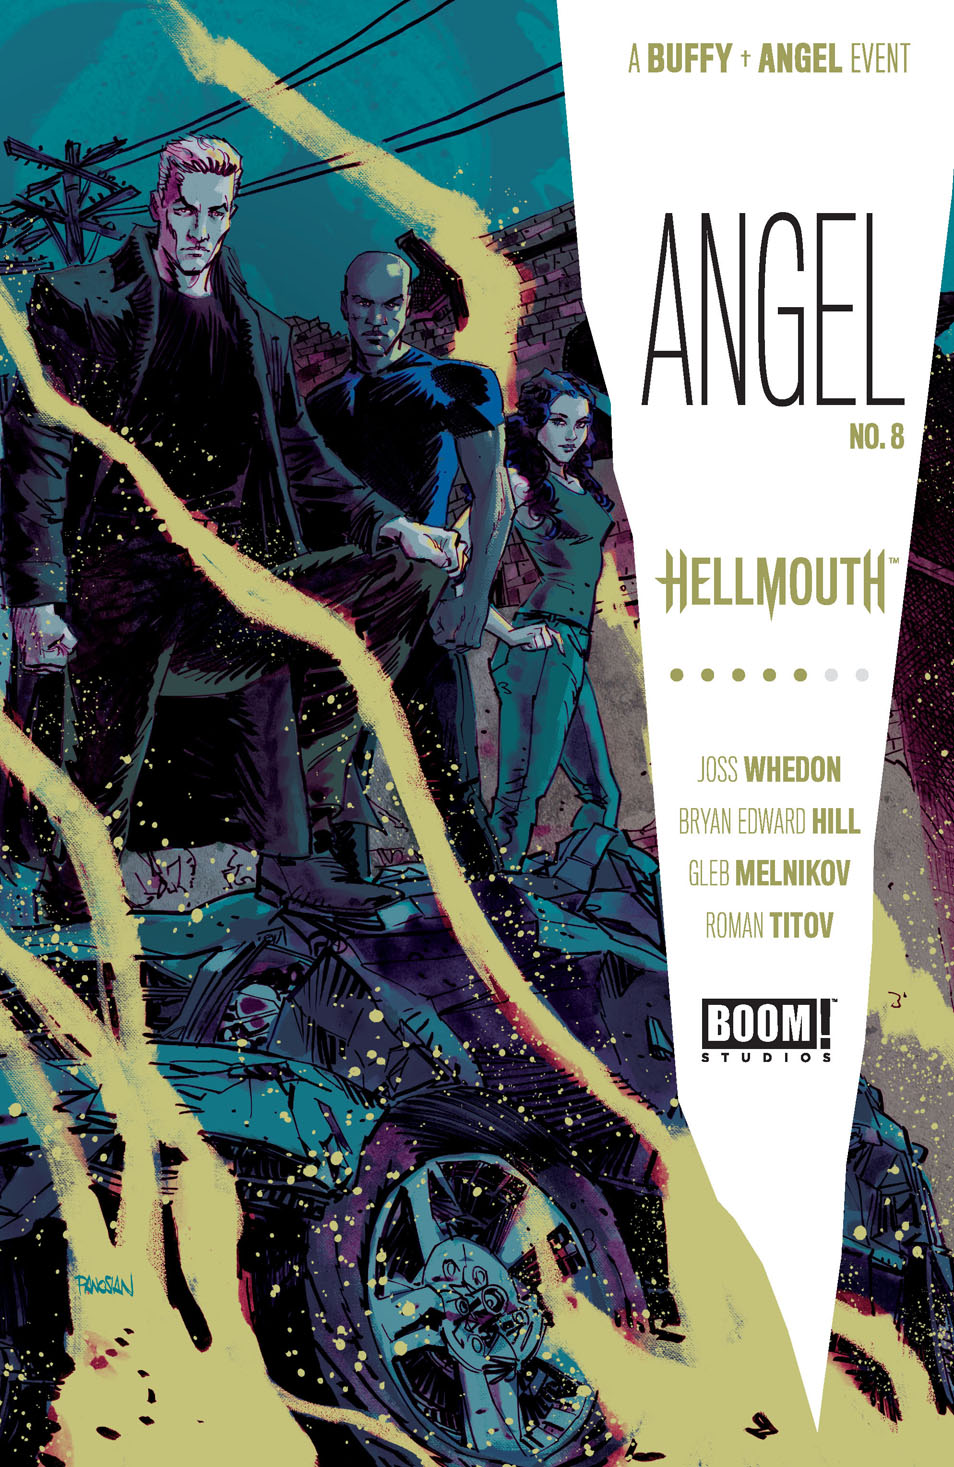 This image is the cover for the book Angel #8, Angel